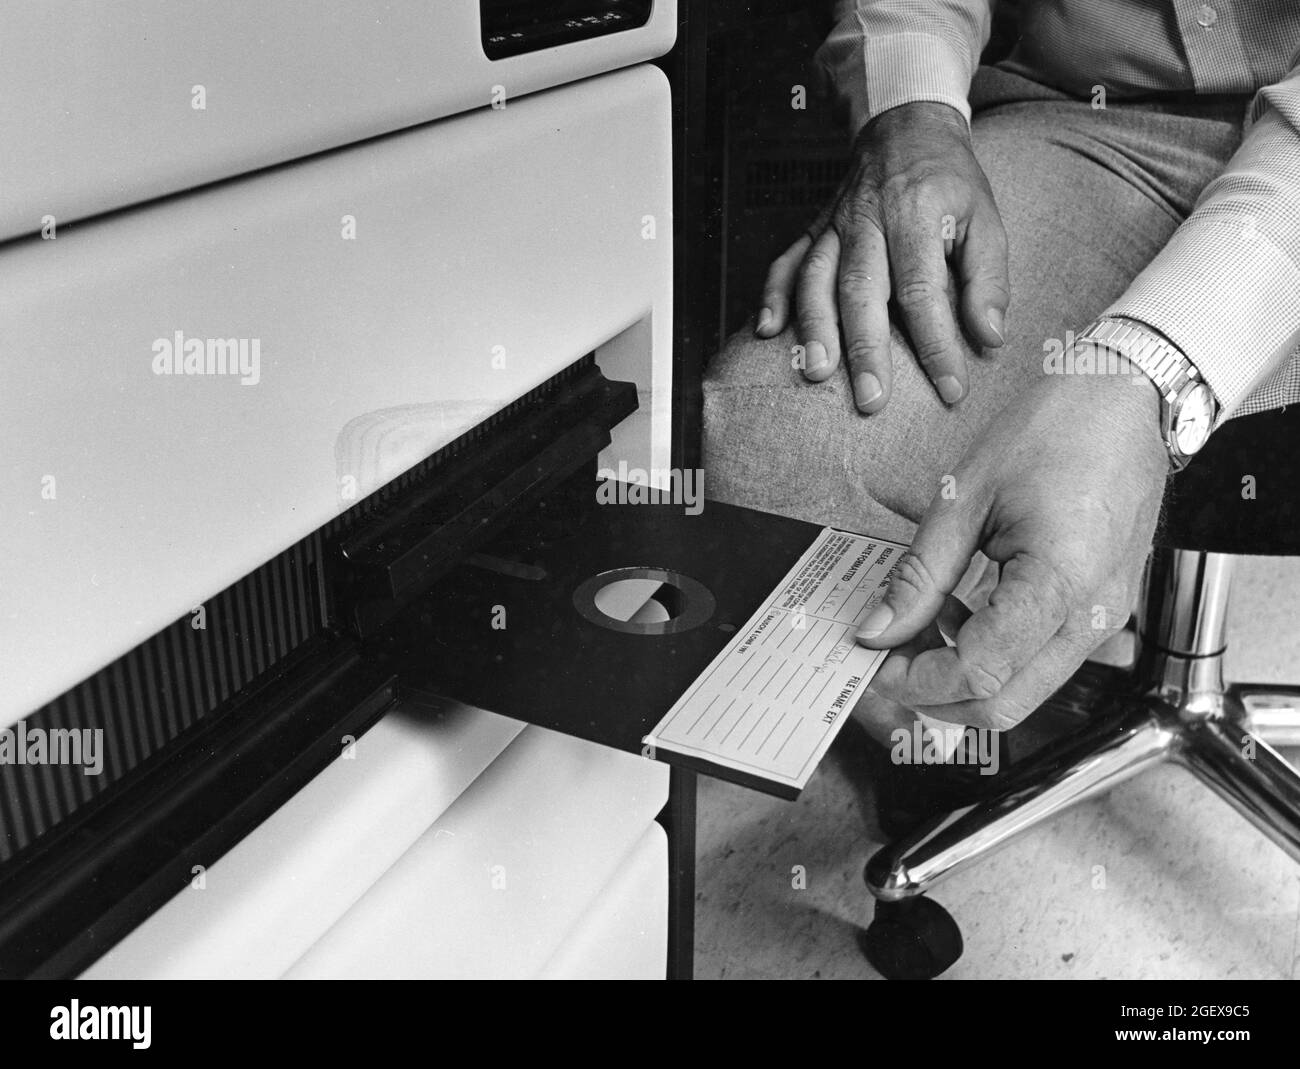 Austin Texas USA, circa 1990: Worker inserts a 5.25-inch floppy disk, made by Bausch & Lomb, into a CAD computer workstation. ©Bob Daemmrich Stock Photo